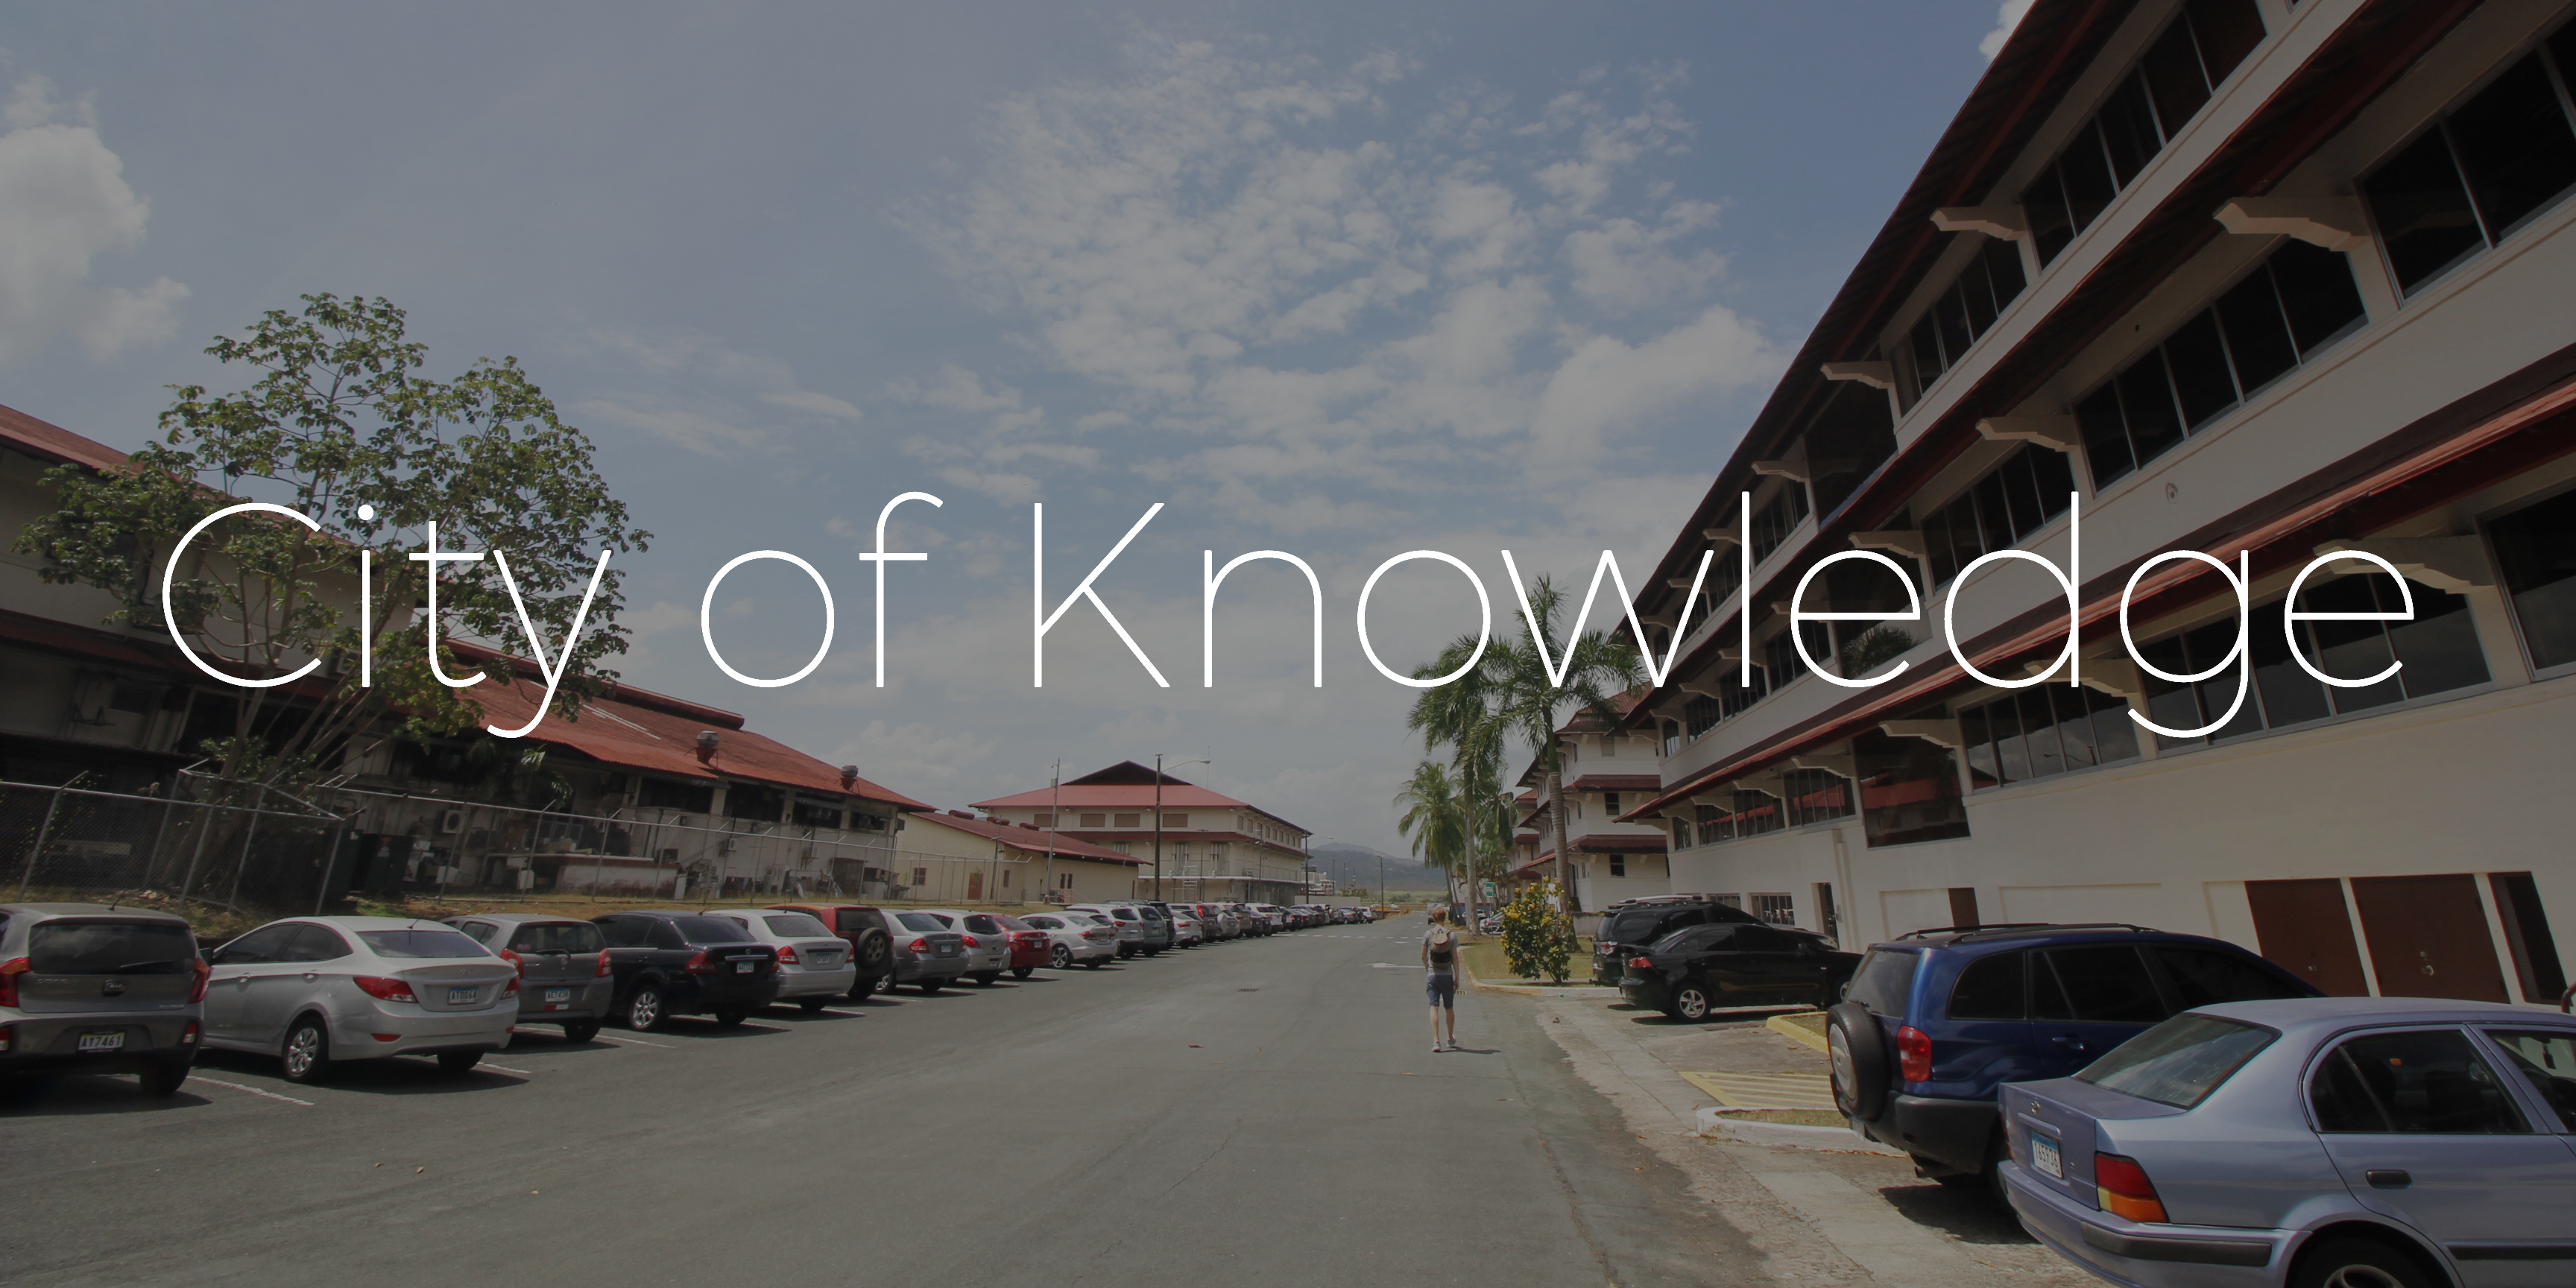 The Most Innovative Hub of Panama: The City of Knowledge